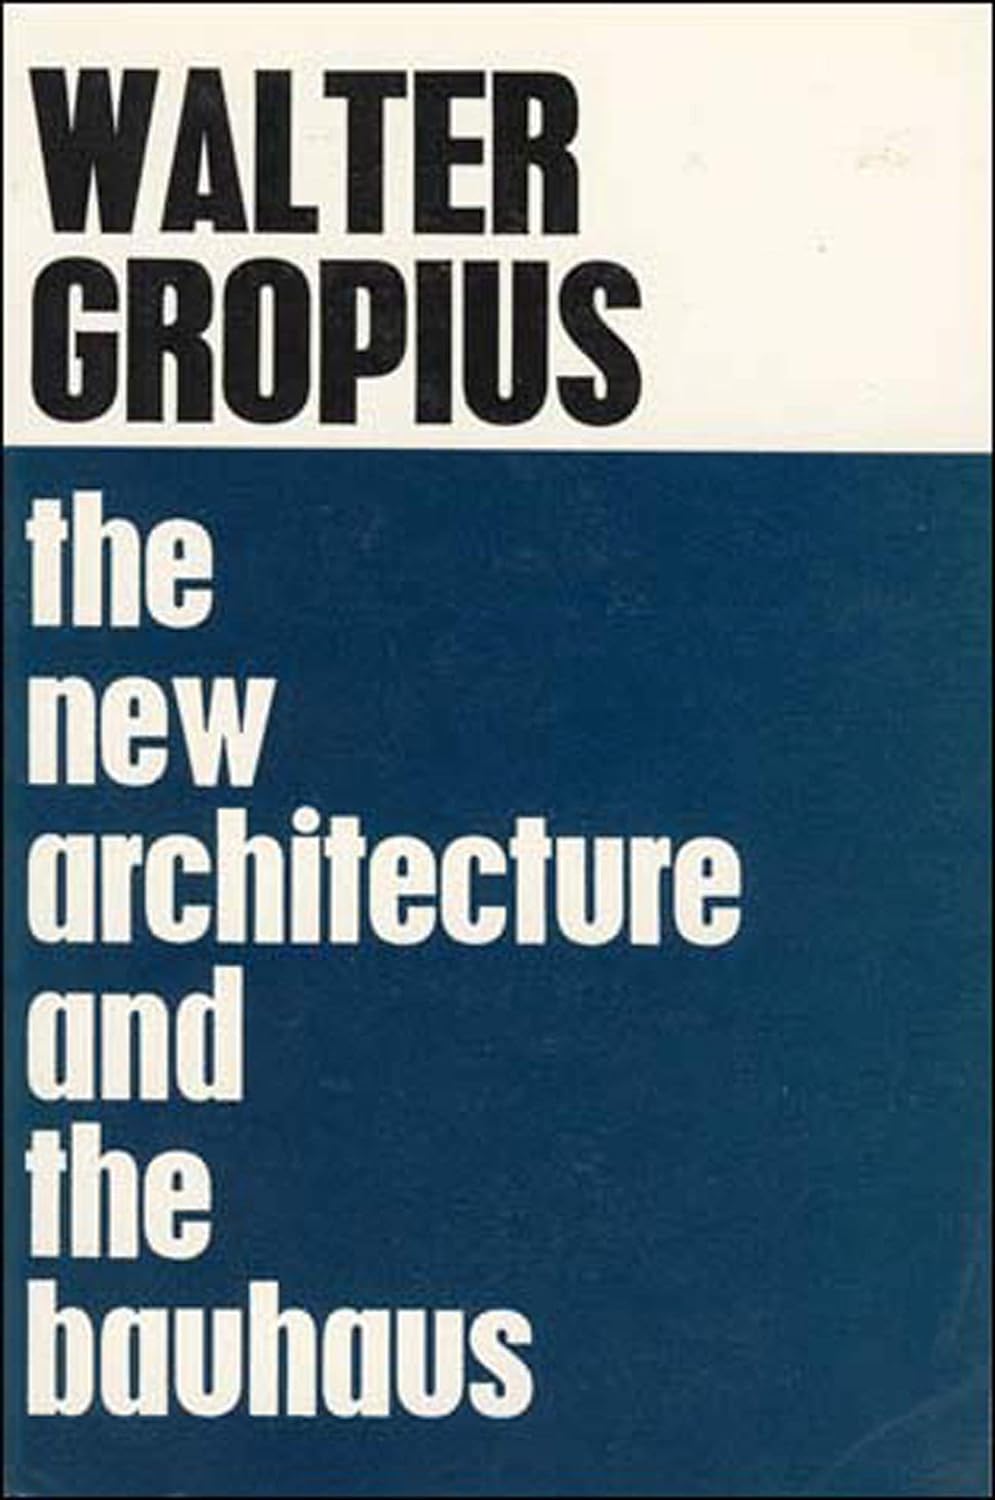 The New Architecture and The Bauhaus - Walter Gropius